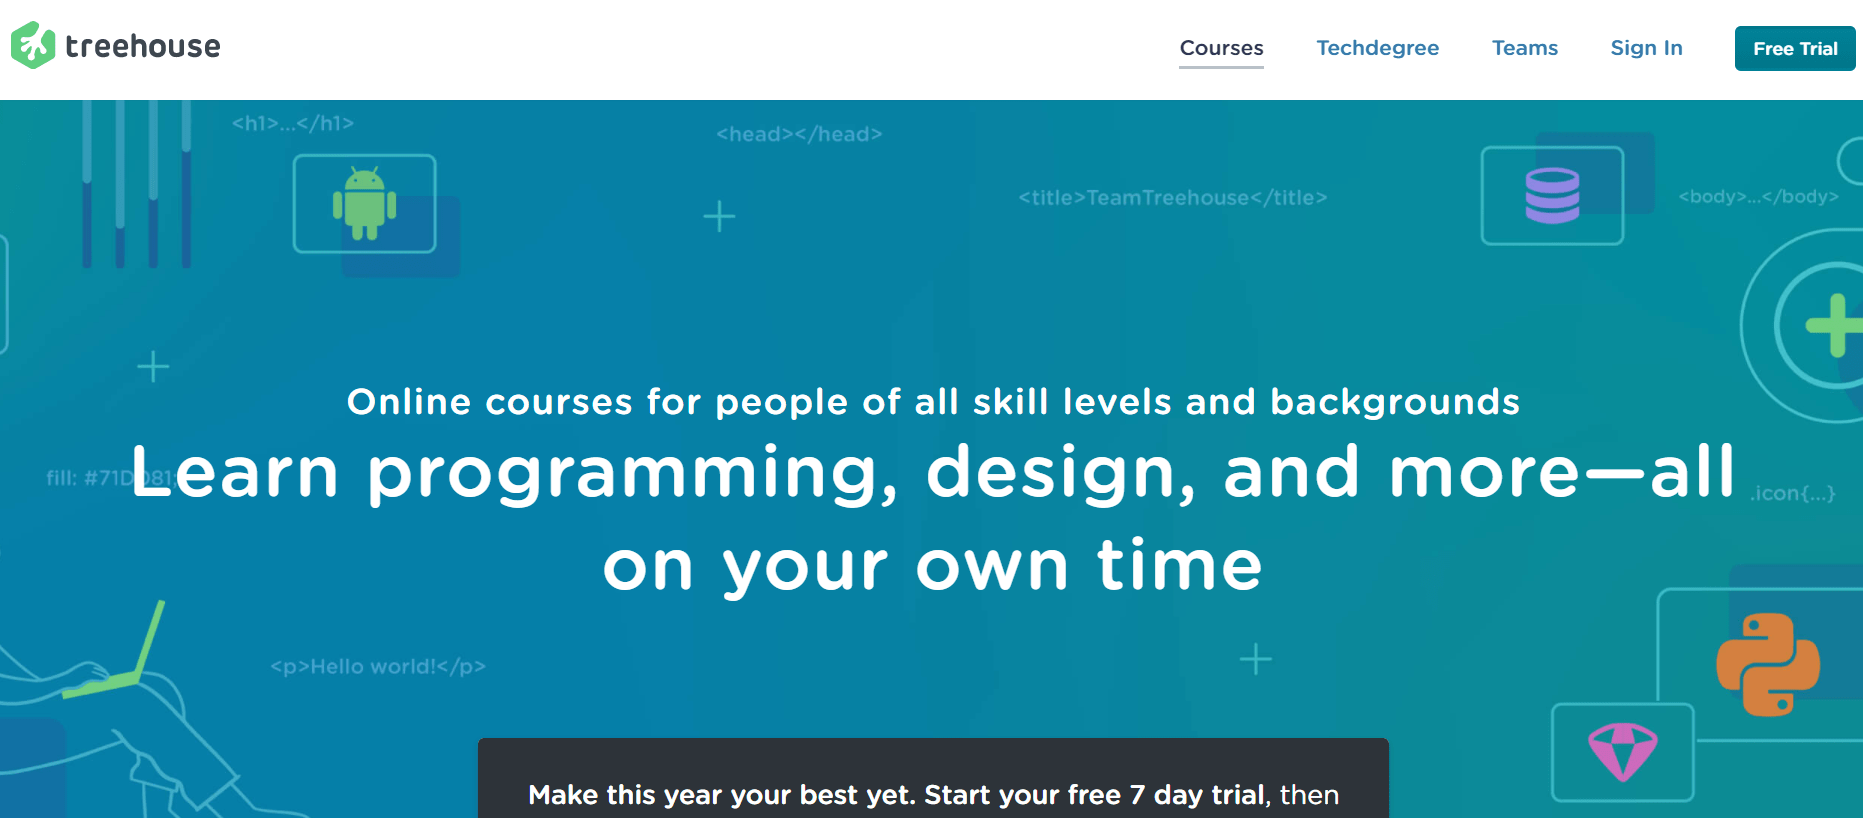 treehouse courses